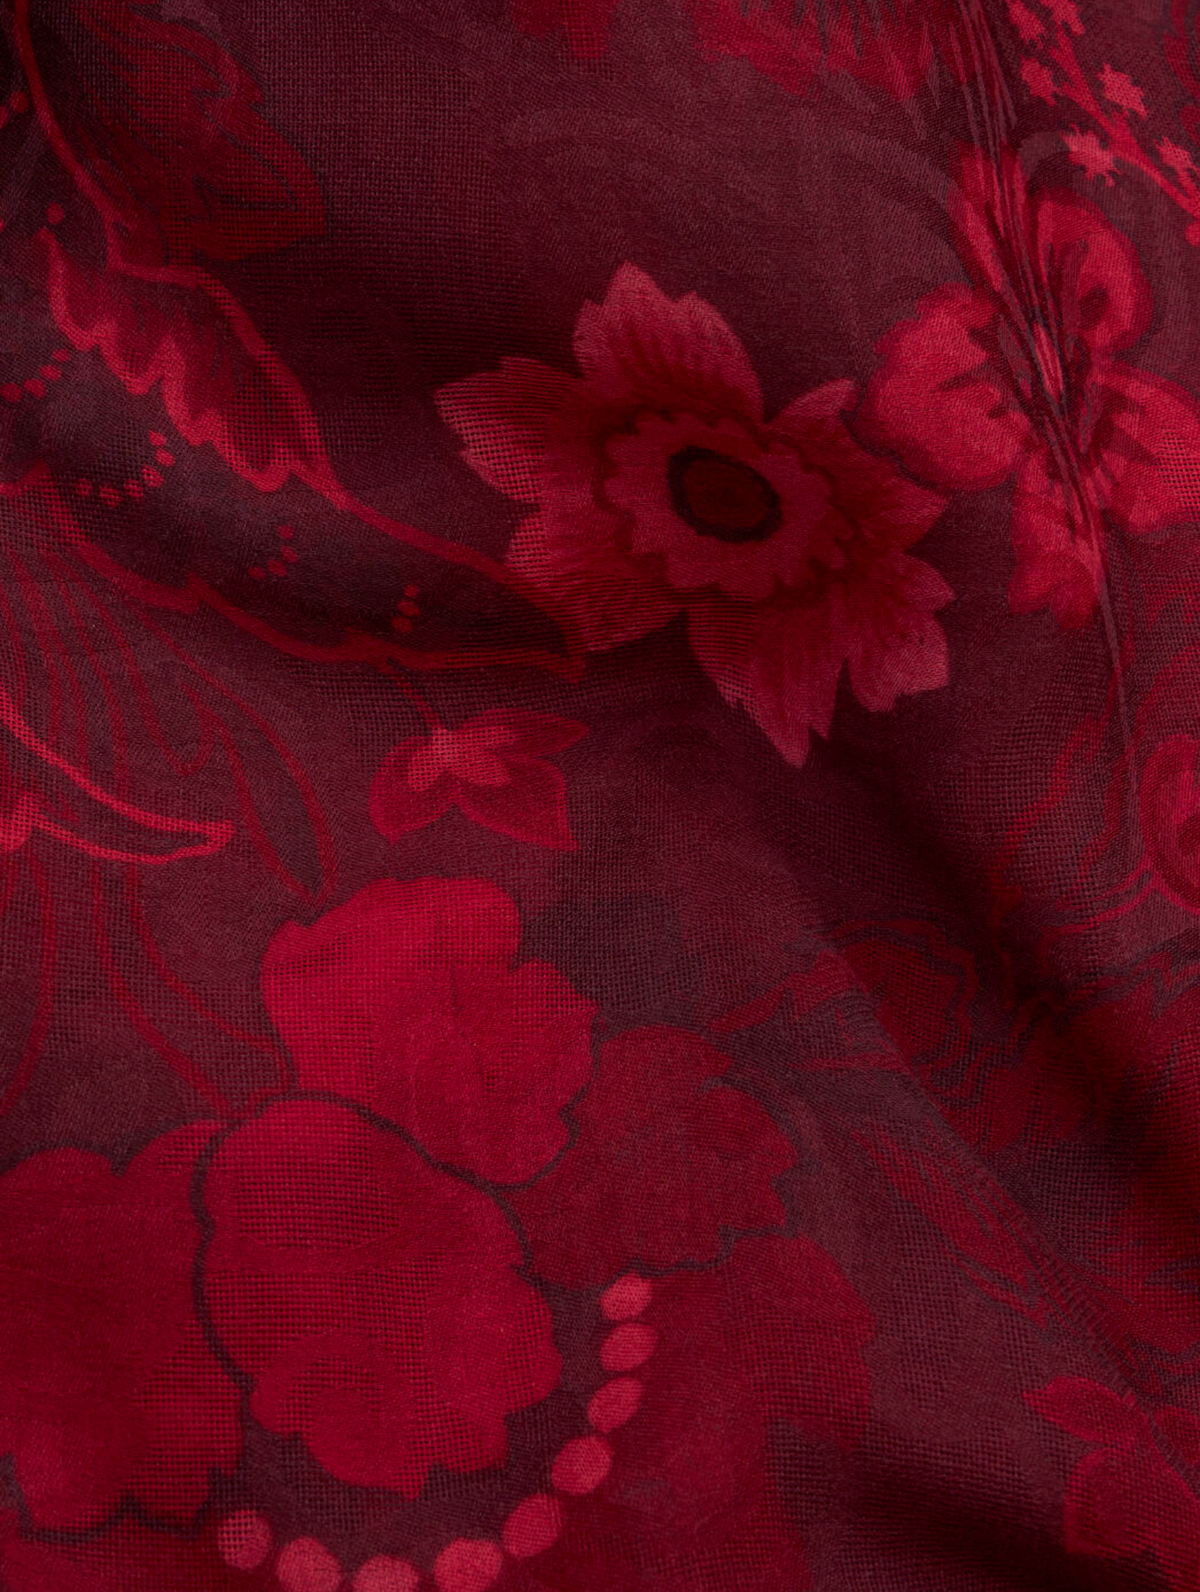 ETRO CASHMERE FLORAL SCARF - RED